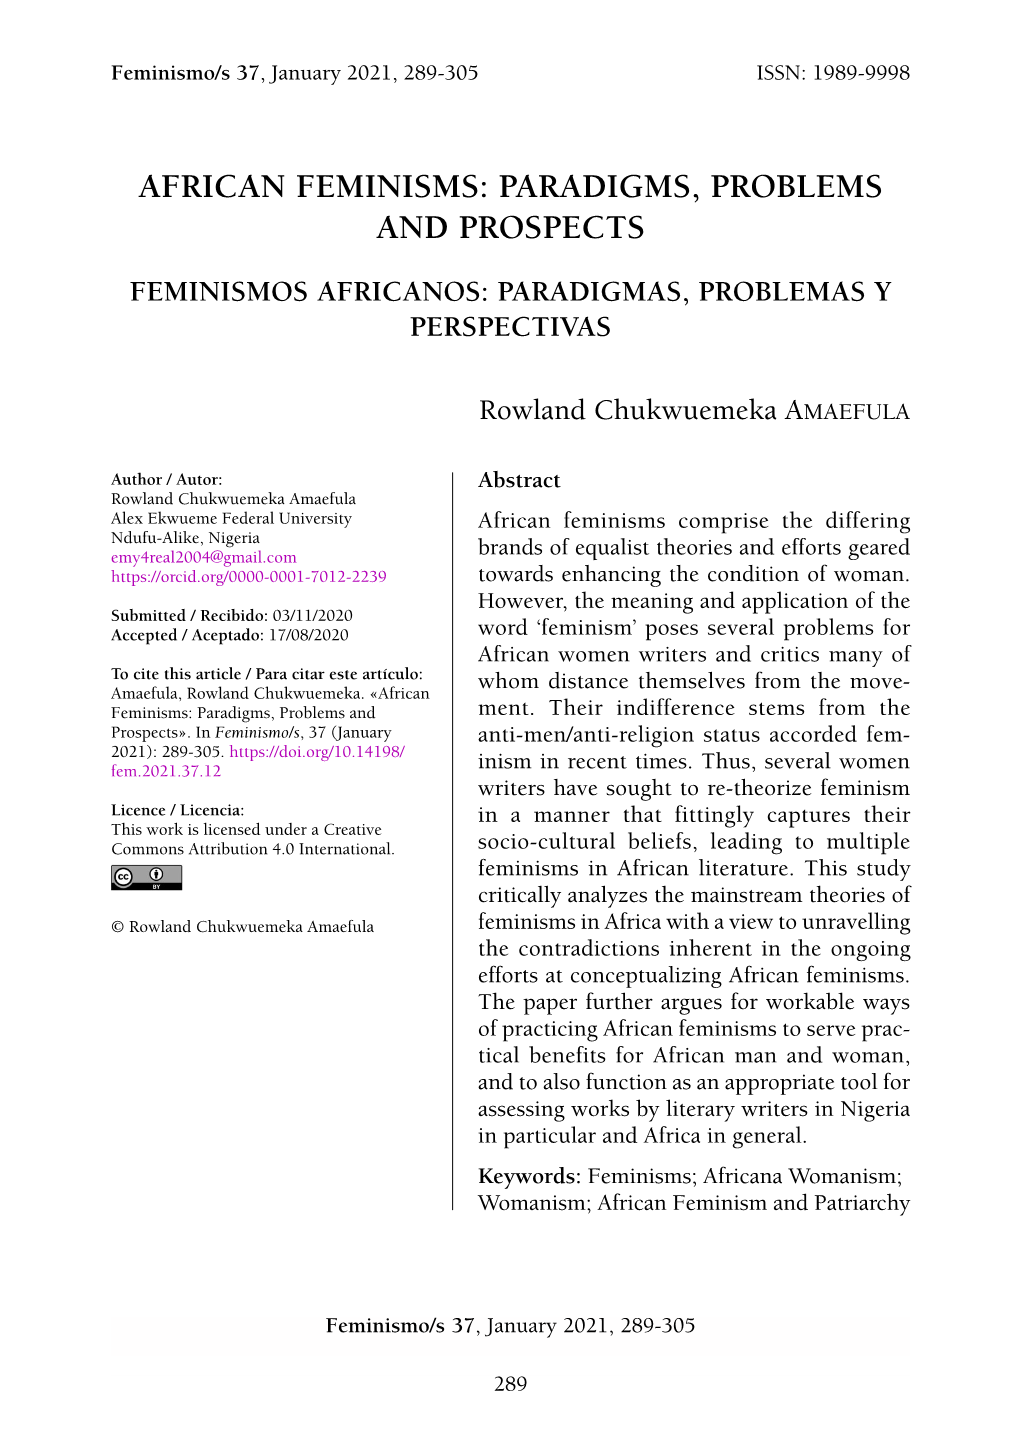 African Feminisms: Paradigms, Problems and Prospects